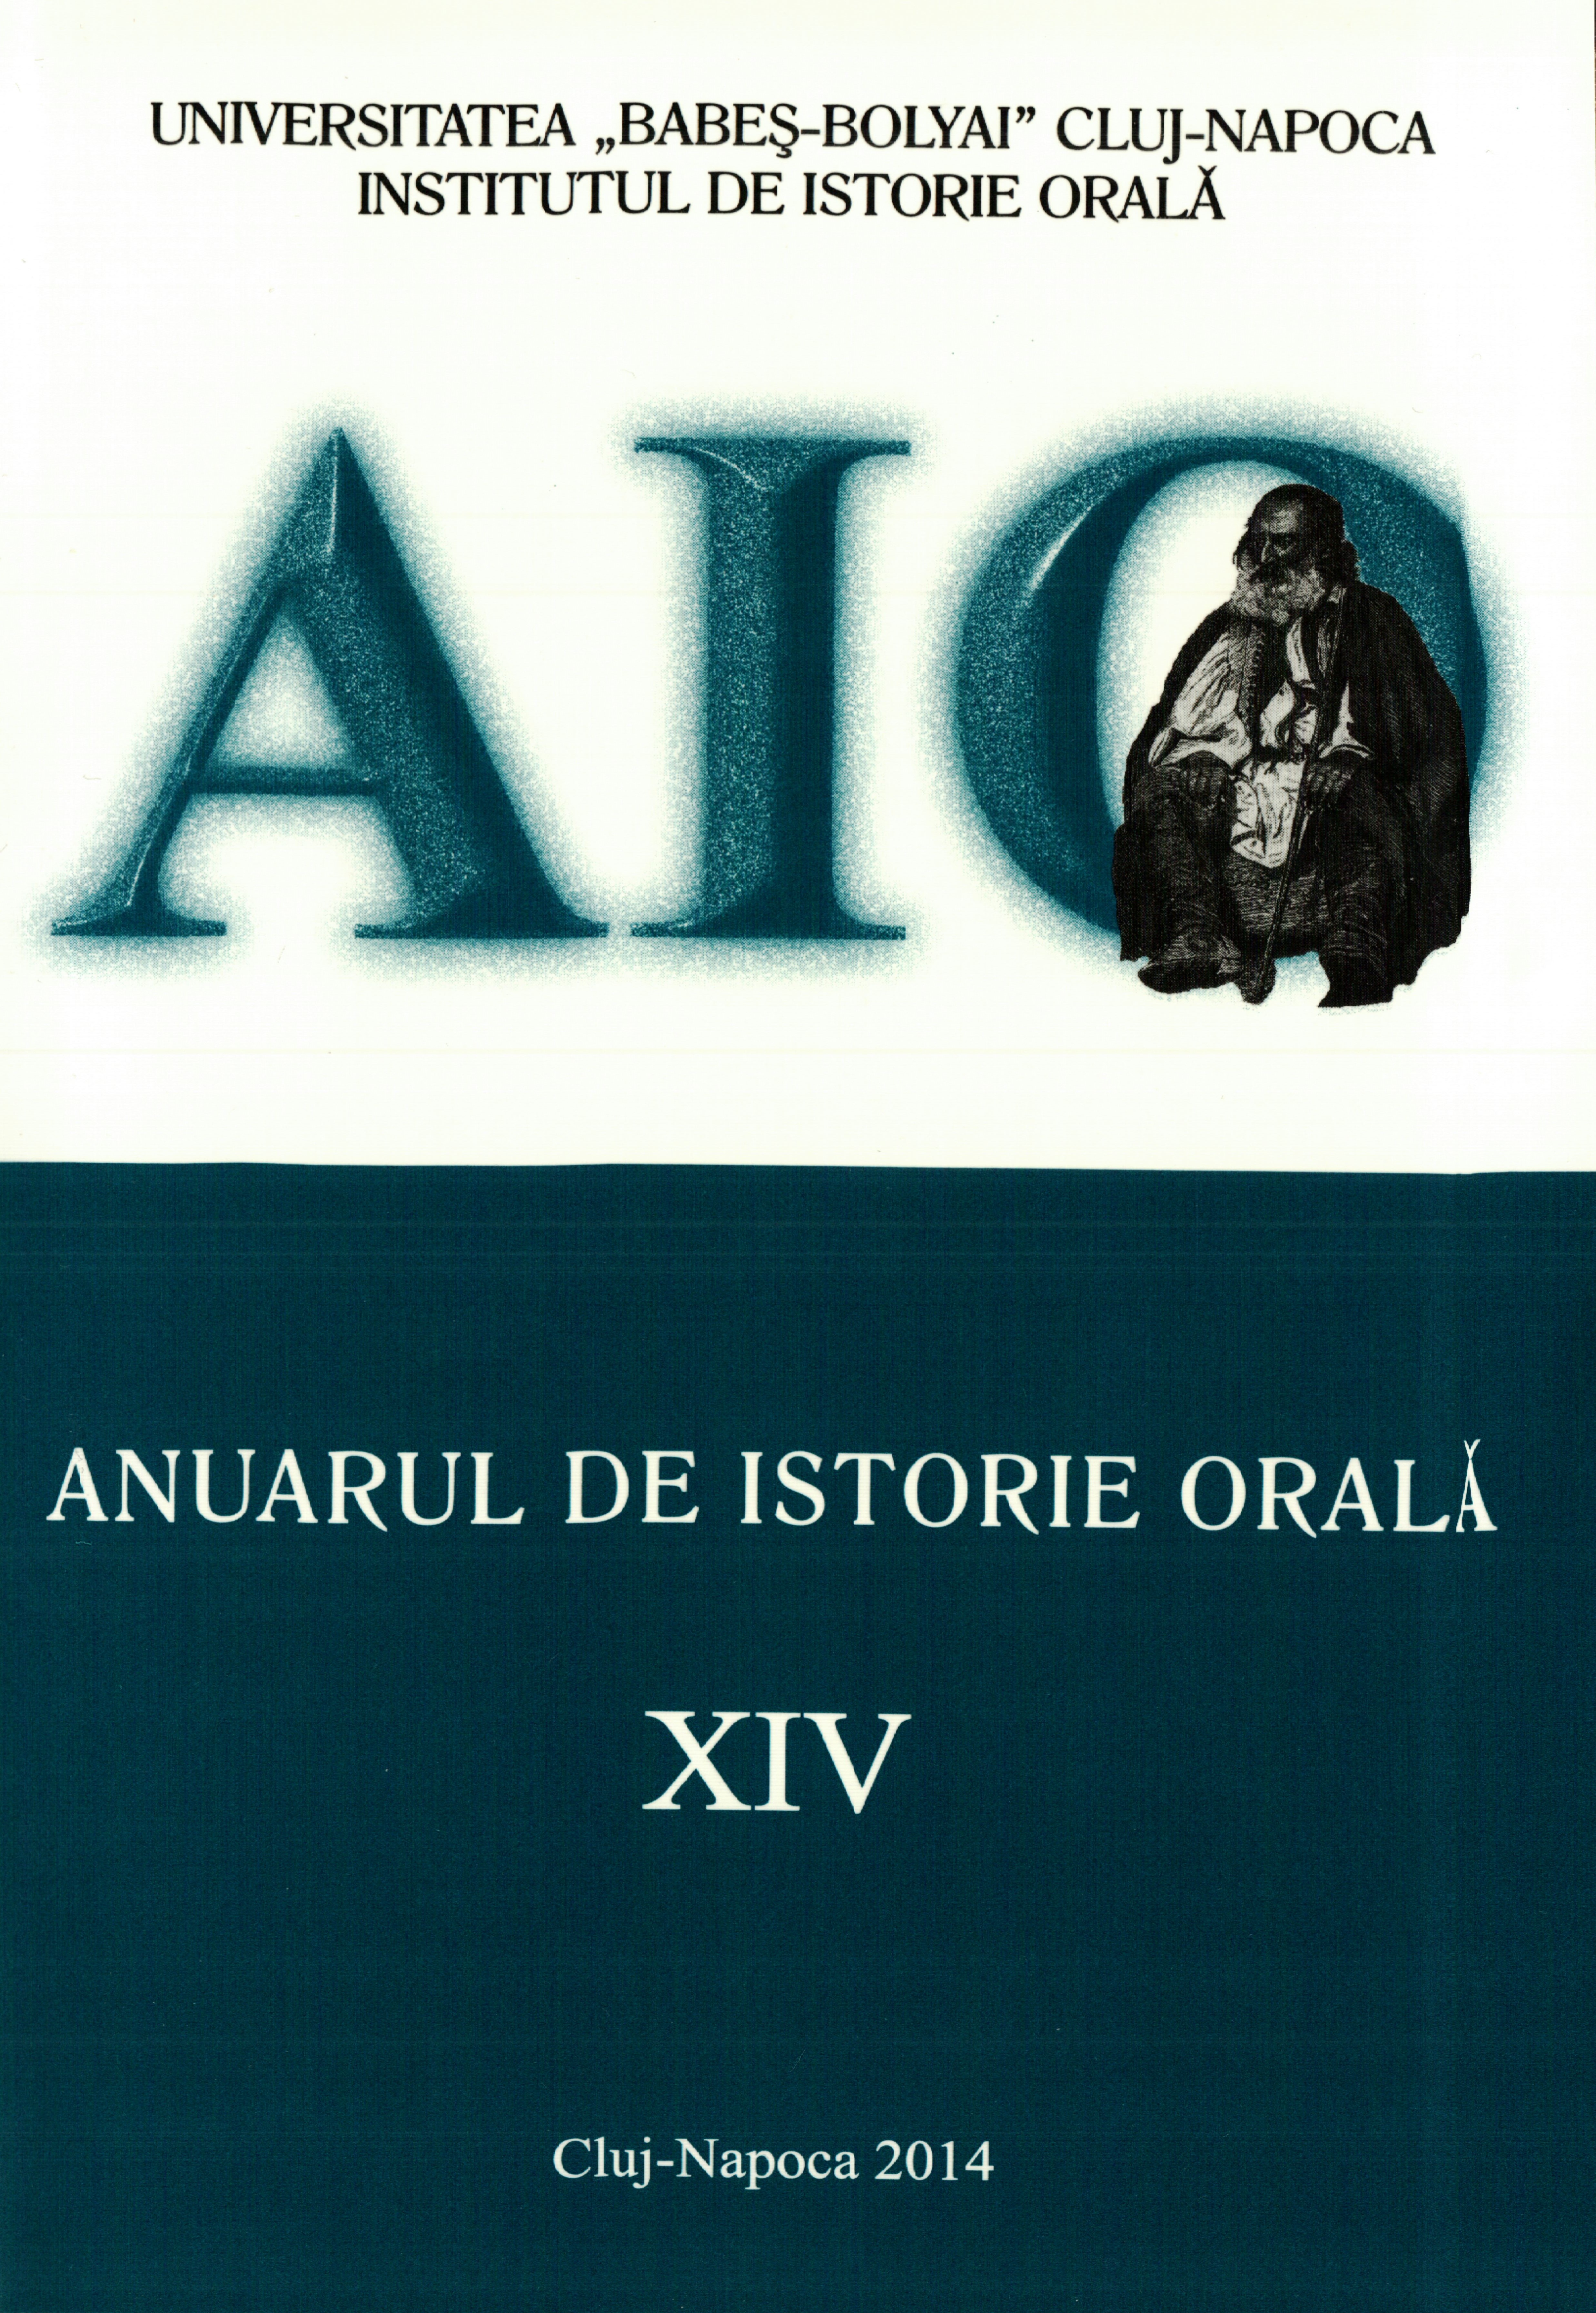 The Hieromonk Valentin Bilţ (1896-1960), between the dead of Aiud Cover Image